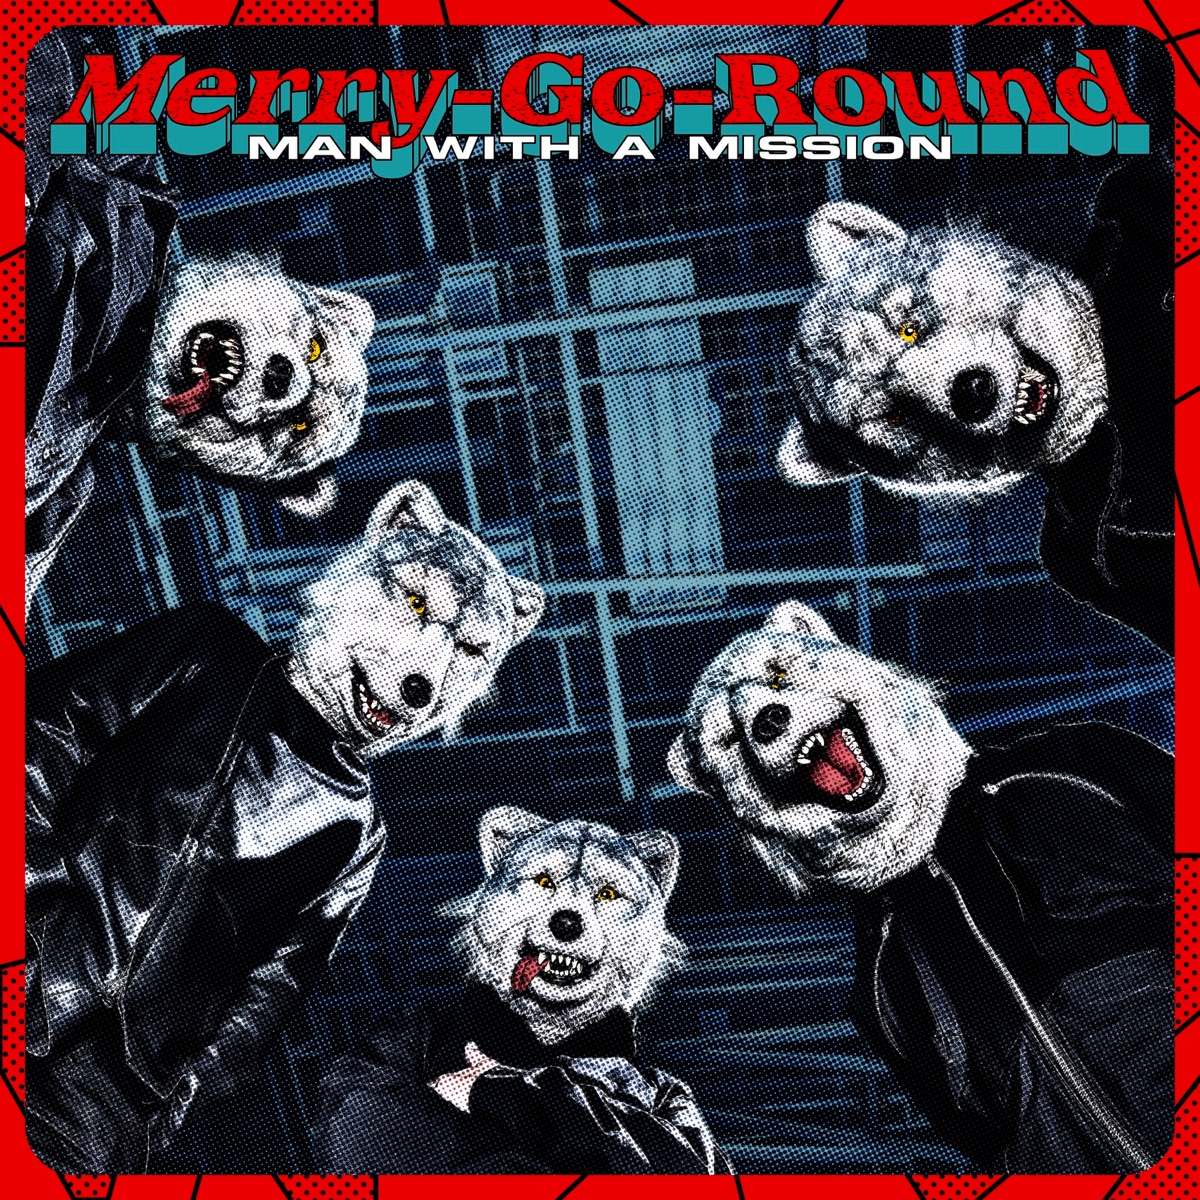 Cover art for『MAN WITH A MISSION - Merry-Go-Round』from the release『Merry-Go-Round』